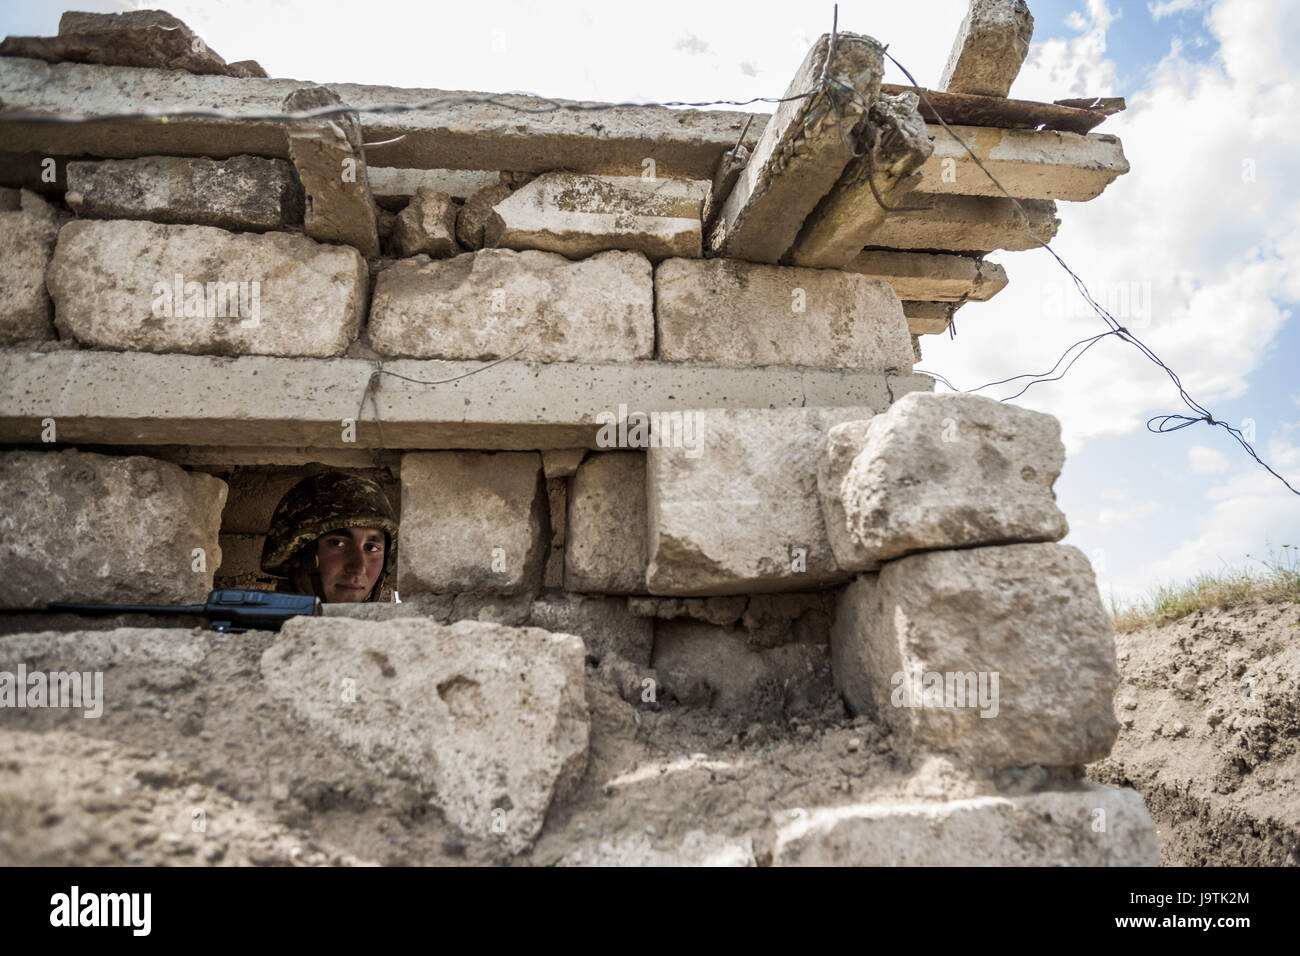 Martakert, Martakert, Nagorno Karabakh. 31st May, 2017. Soldier of Nagorno Karabakh army in the trenches close to Martakert frontline, less than 300 meters of the Azerbaijan army positions. Credit: Celestino Arce/ZUMA Wire/Alamy Live News Stock Photo